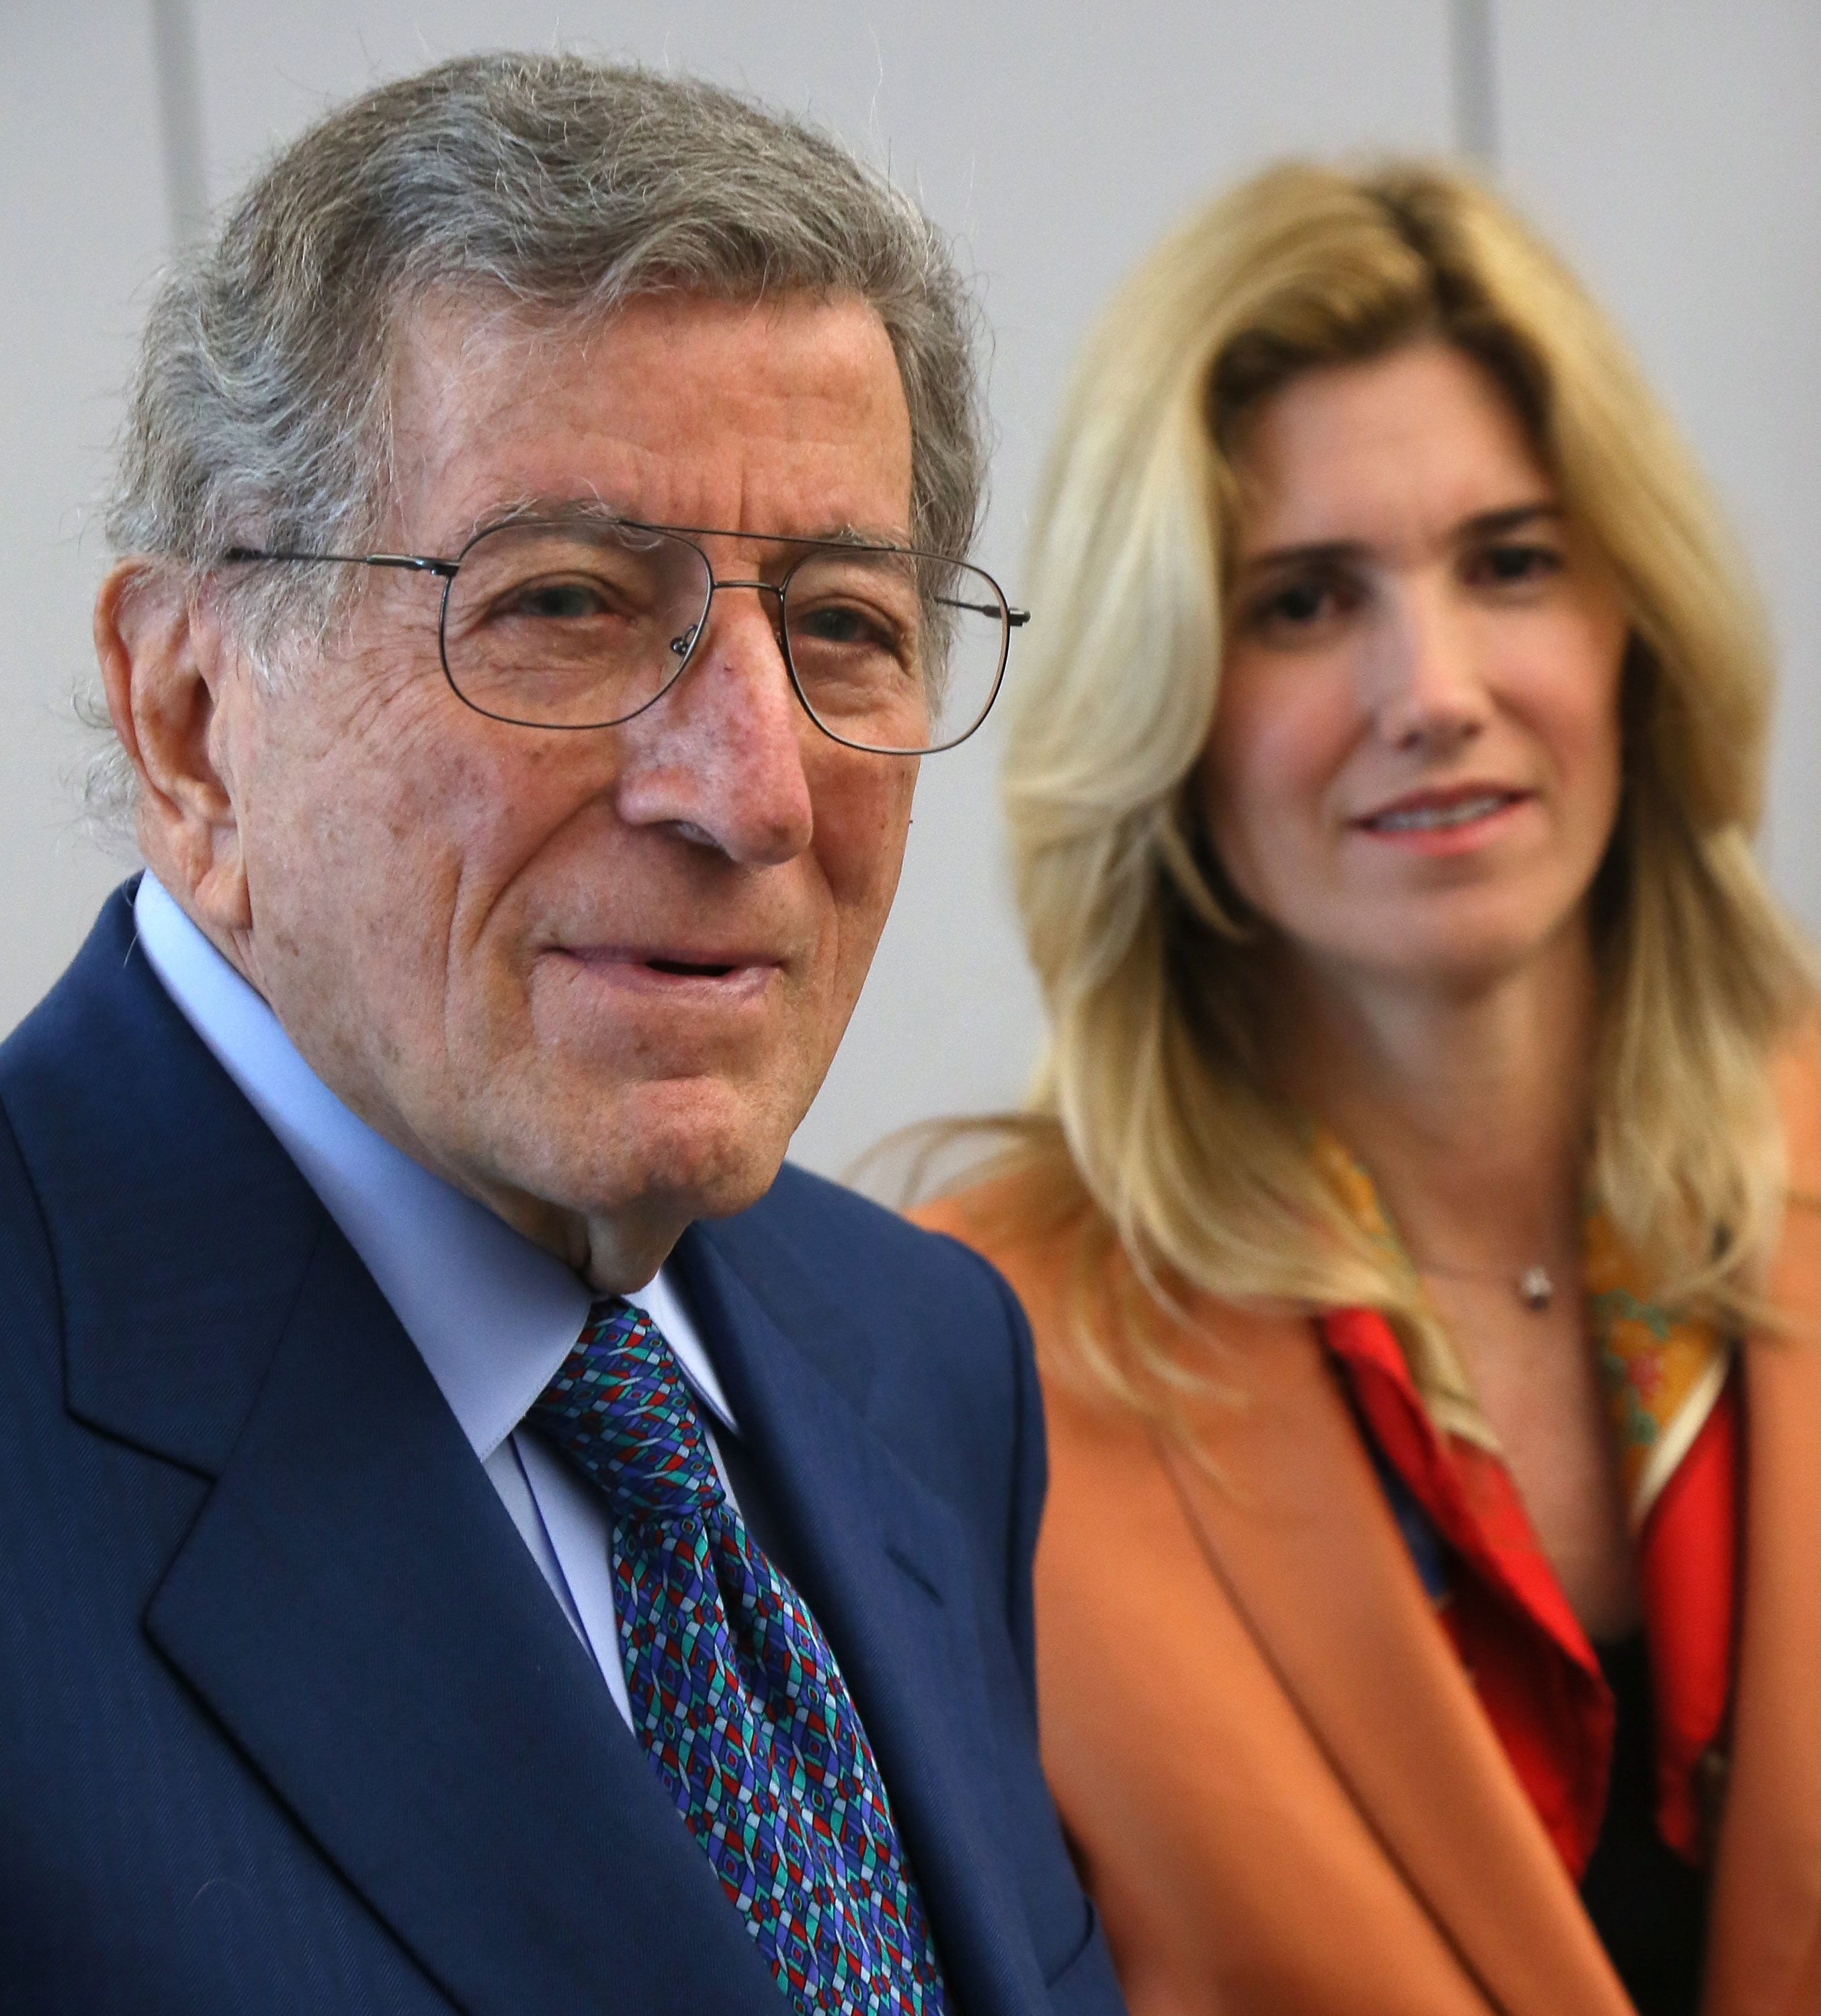 Tony Bennett and his wife Susan Benedetto tour Esteban E. Torres High School in support of the Los Angeles expansion of Exploring the Arts on April 26, 2013, in Los Angeles, California | Photo: David Livingston/Getty Images